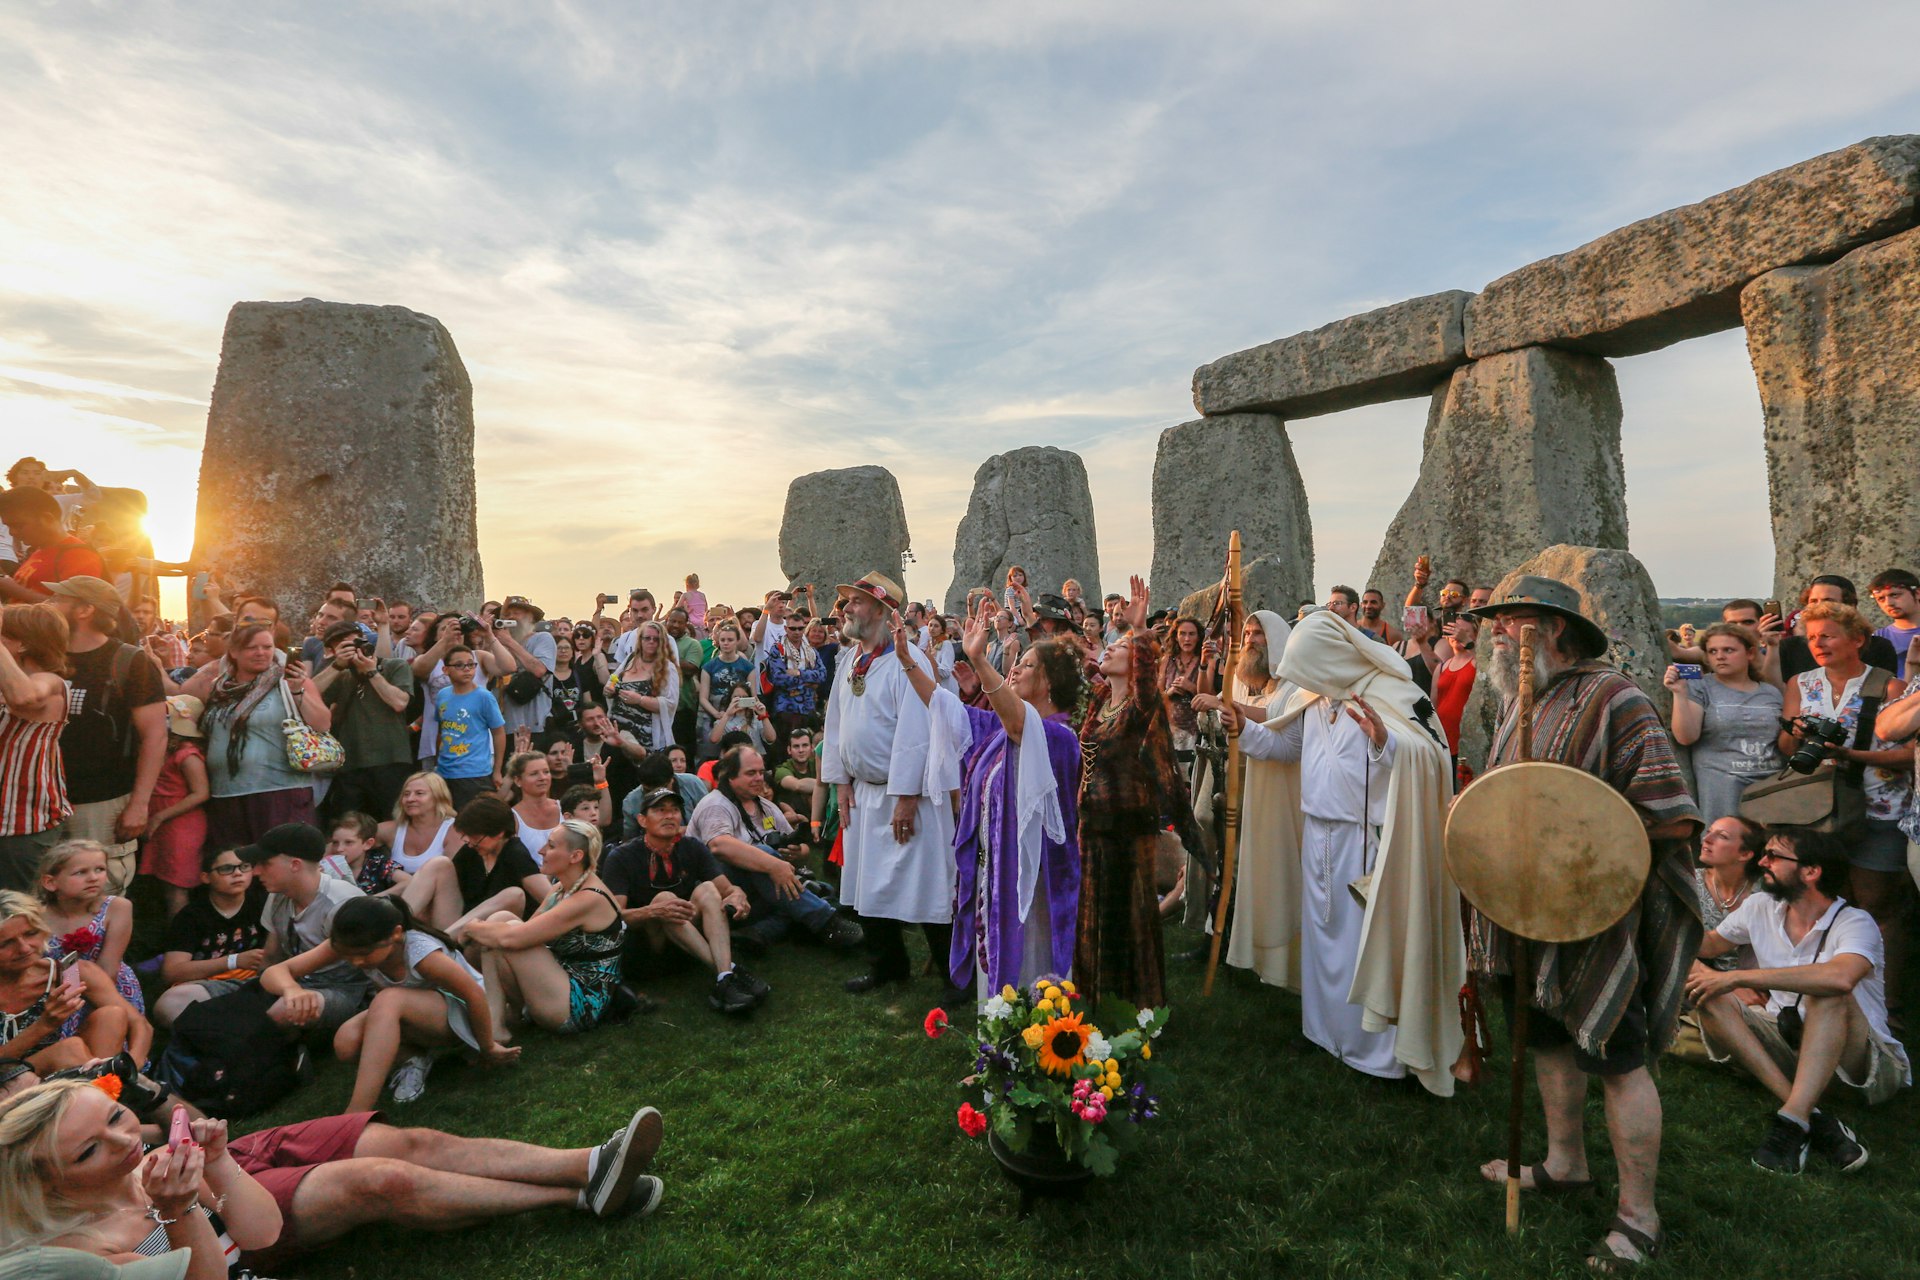 People dressed in New Age clothing celebrate the longest day of the year around the the large stones of Stonehenge